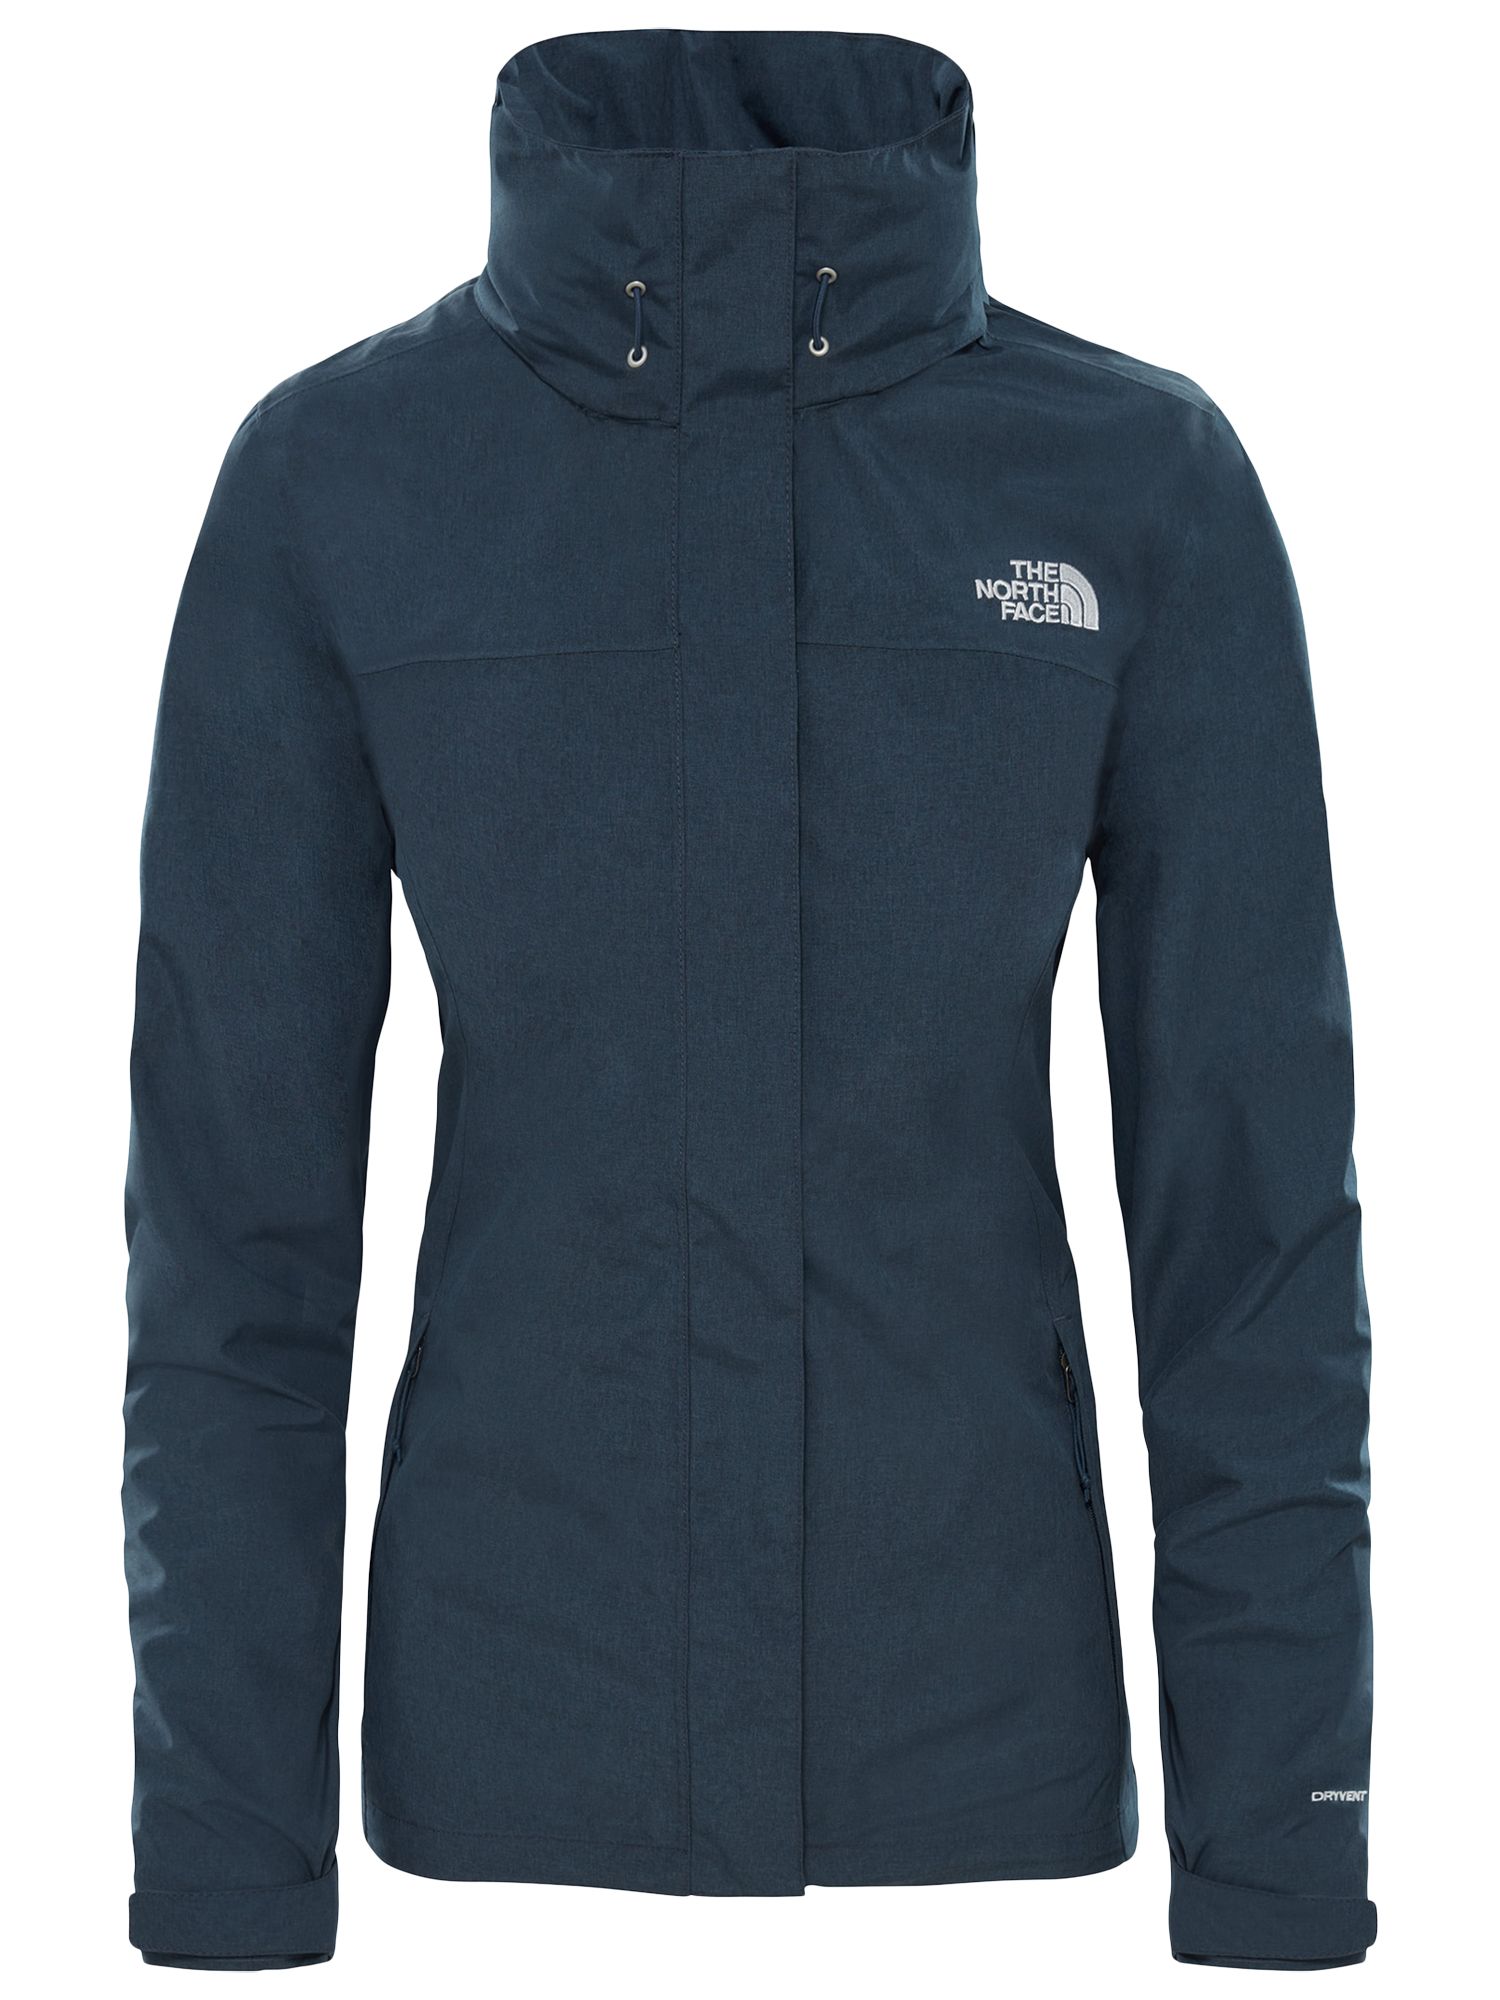 best place to buy north face jackets online